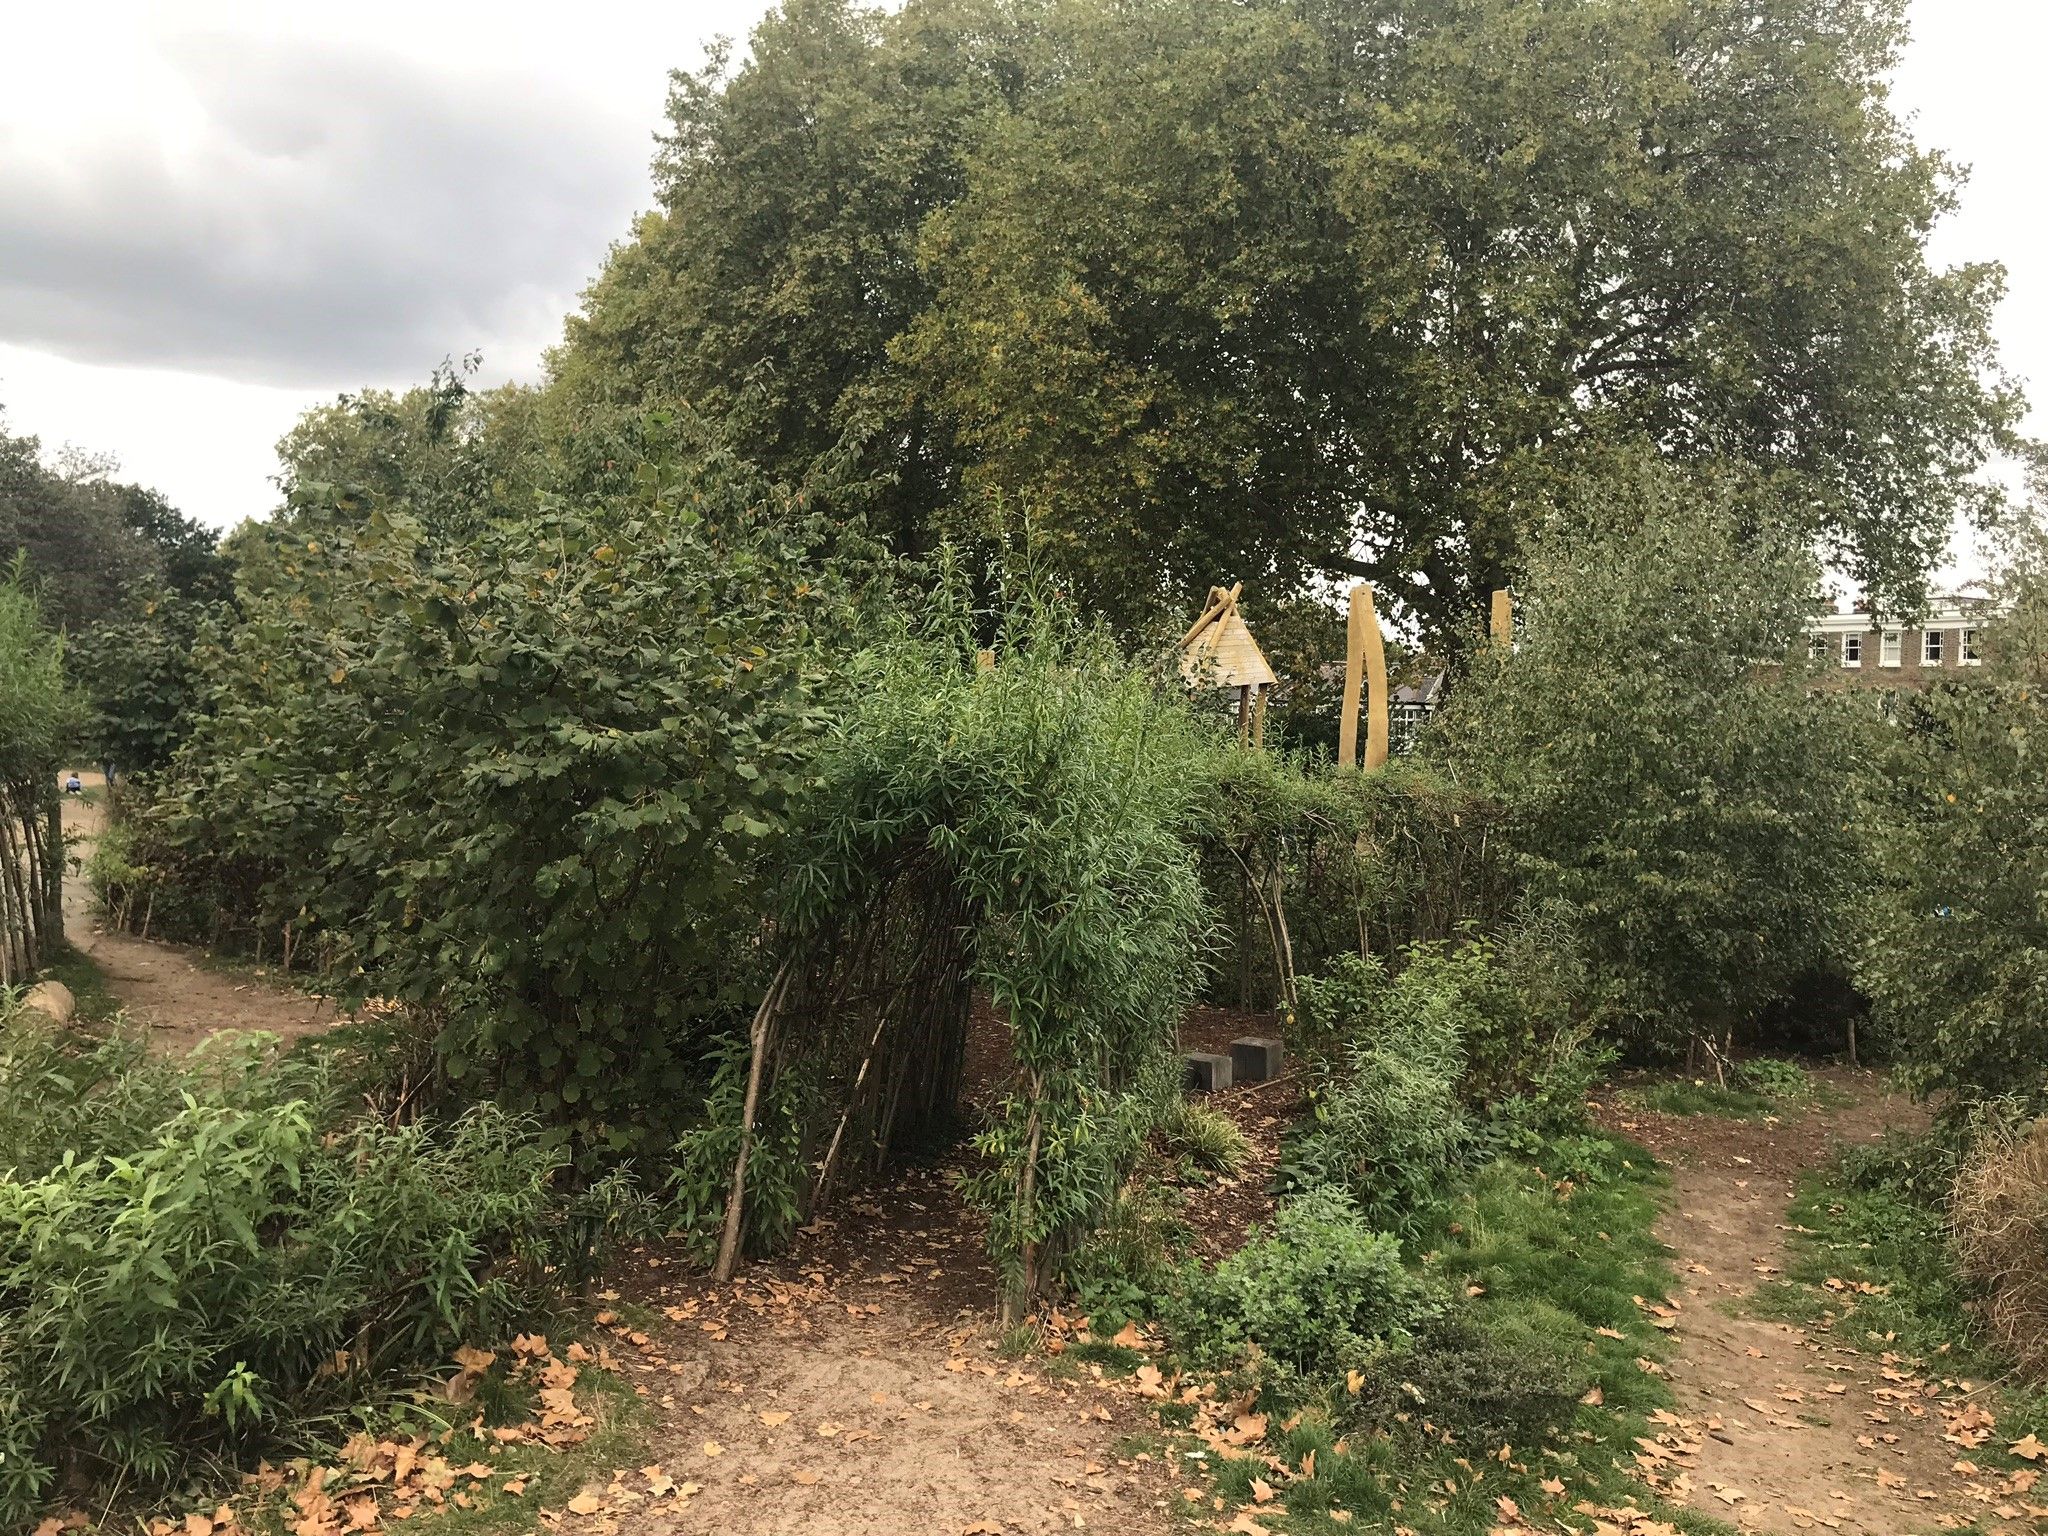 Willow tunnels and play equipment in the play area at Greenwich Park